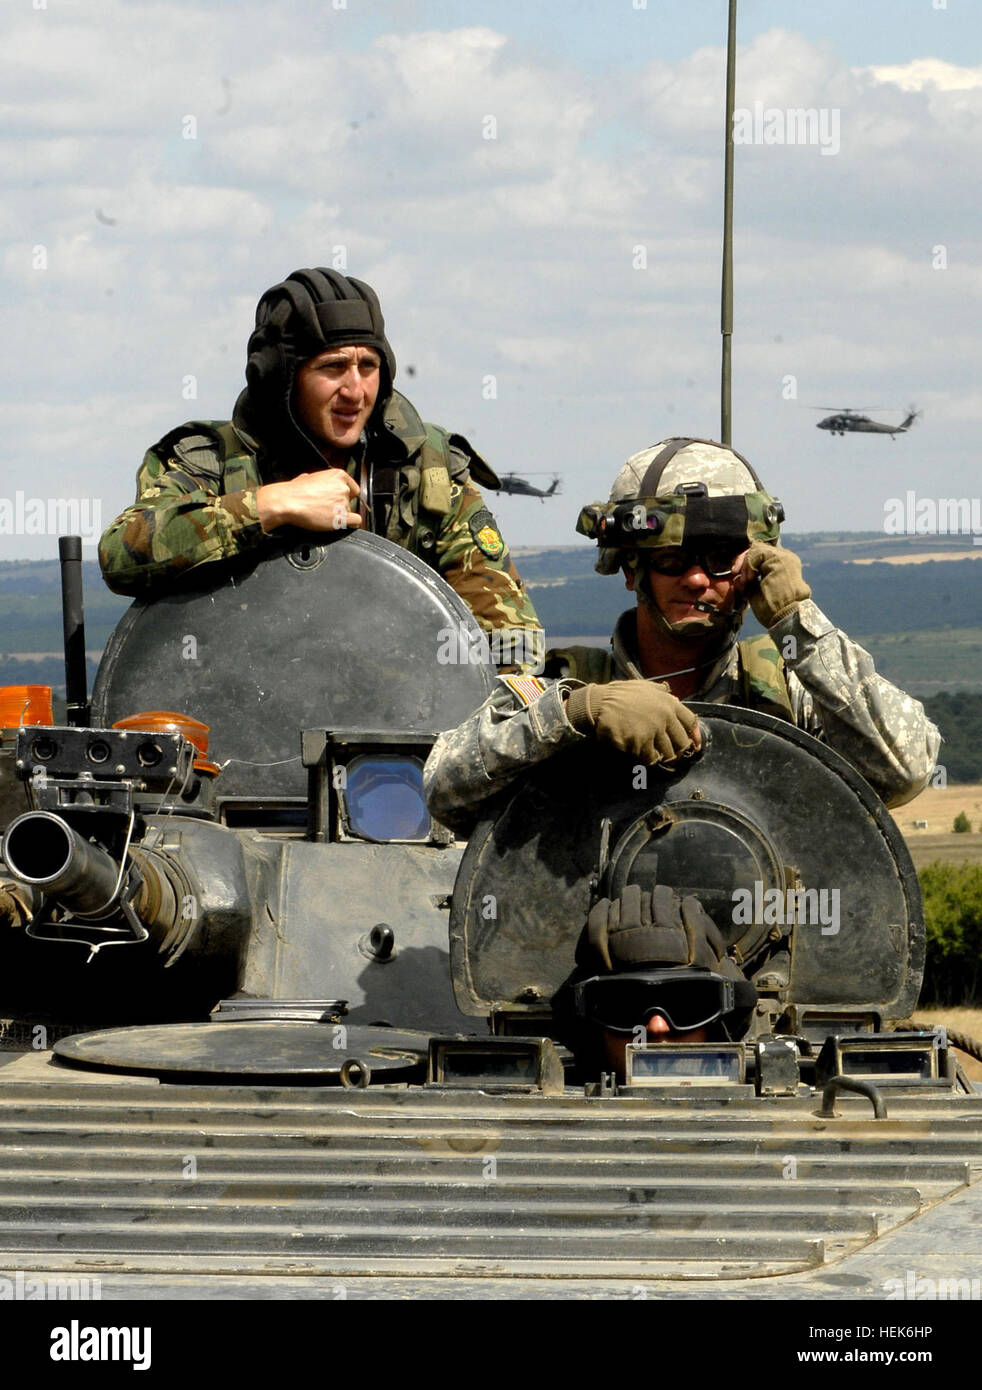 Bulgarian and American Soldiers man the command section of a Bulgarina BMP-1 tracked armored troop carrier during  Military Operations in Urban terrain training at the Novo Selo Training Area, Bulgaria. The MOUT site is a major training site for the tri-lateral exercise Immediate Response 06 involving Soliders from Bulgaria, Romania and the U.S. 17-21 July 2006. (U.S.Army photo byGary L. Kieffer) (Released). US soldier in Bulgarian BMP-1 Stock Photo